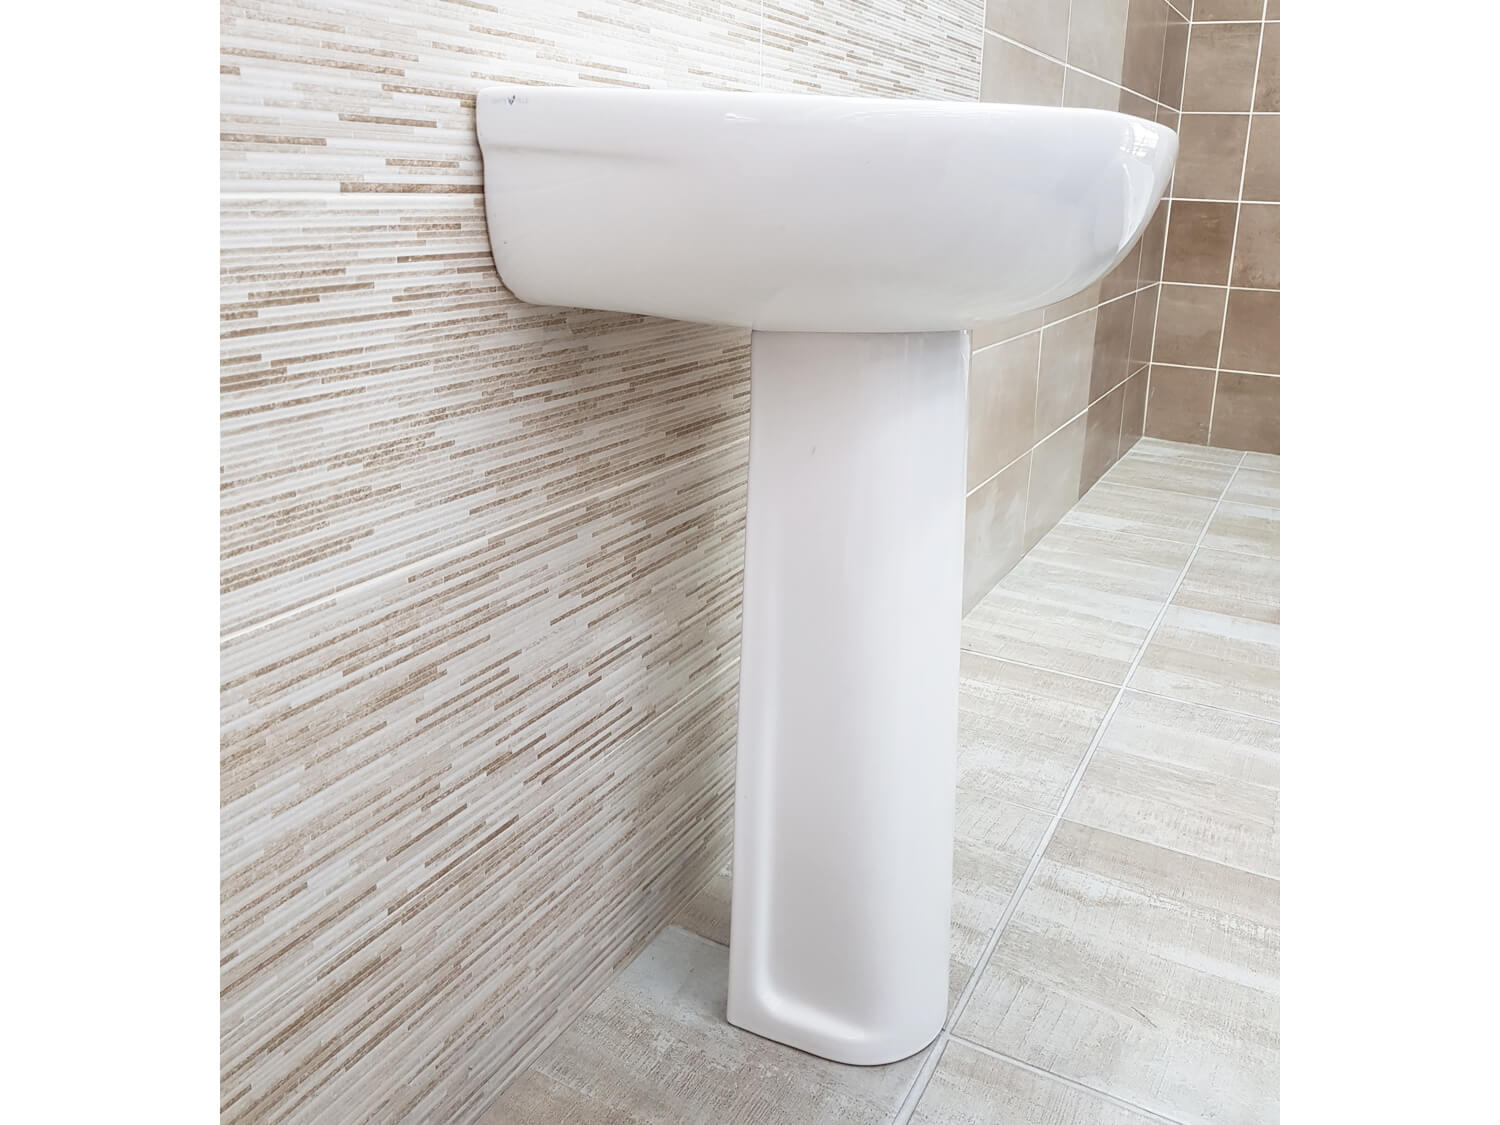 Delta White Wall Mounted Basin & Pedestal Set Side View